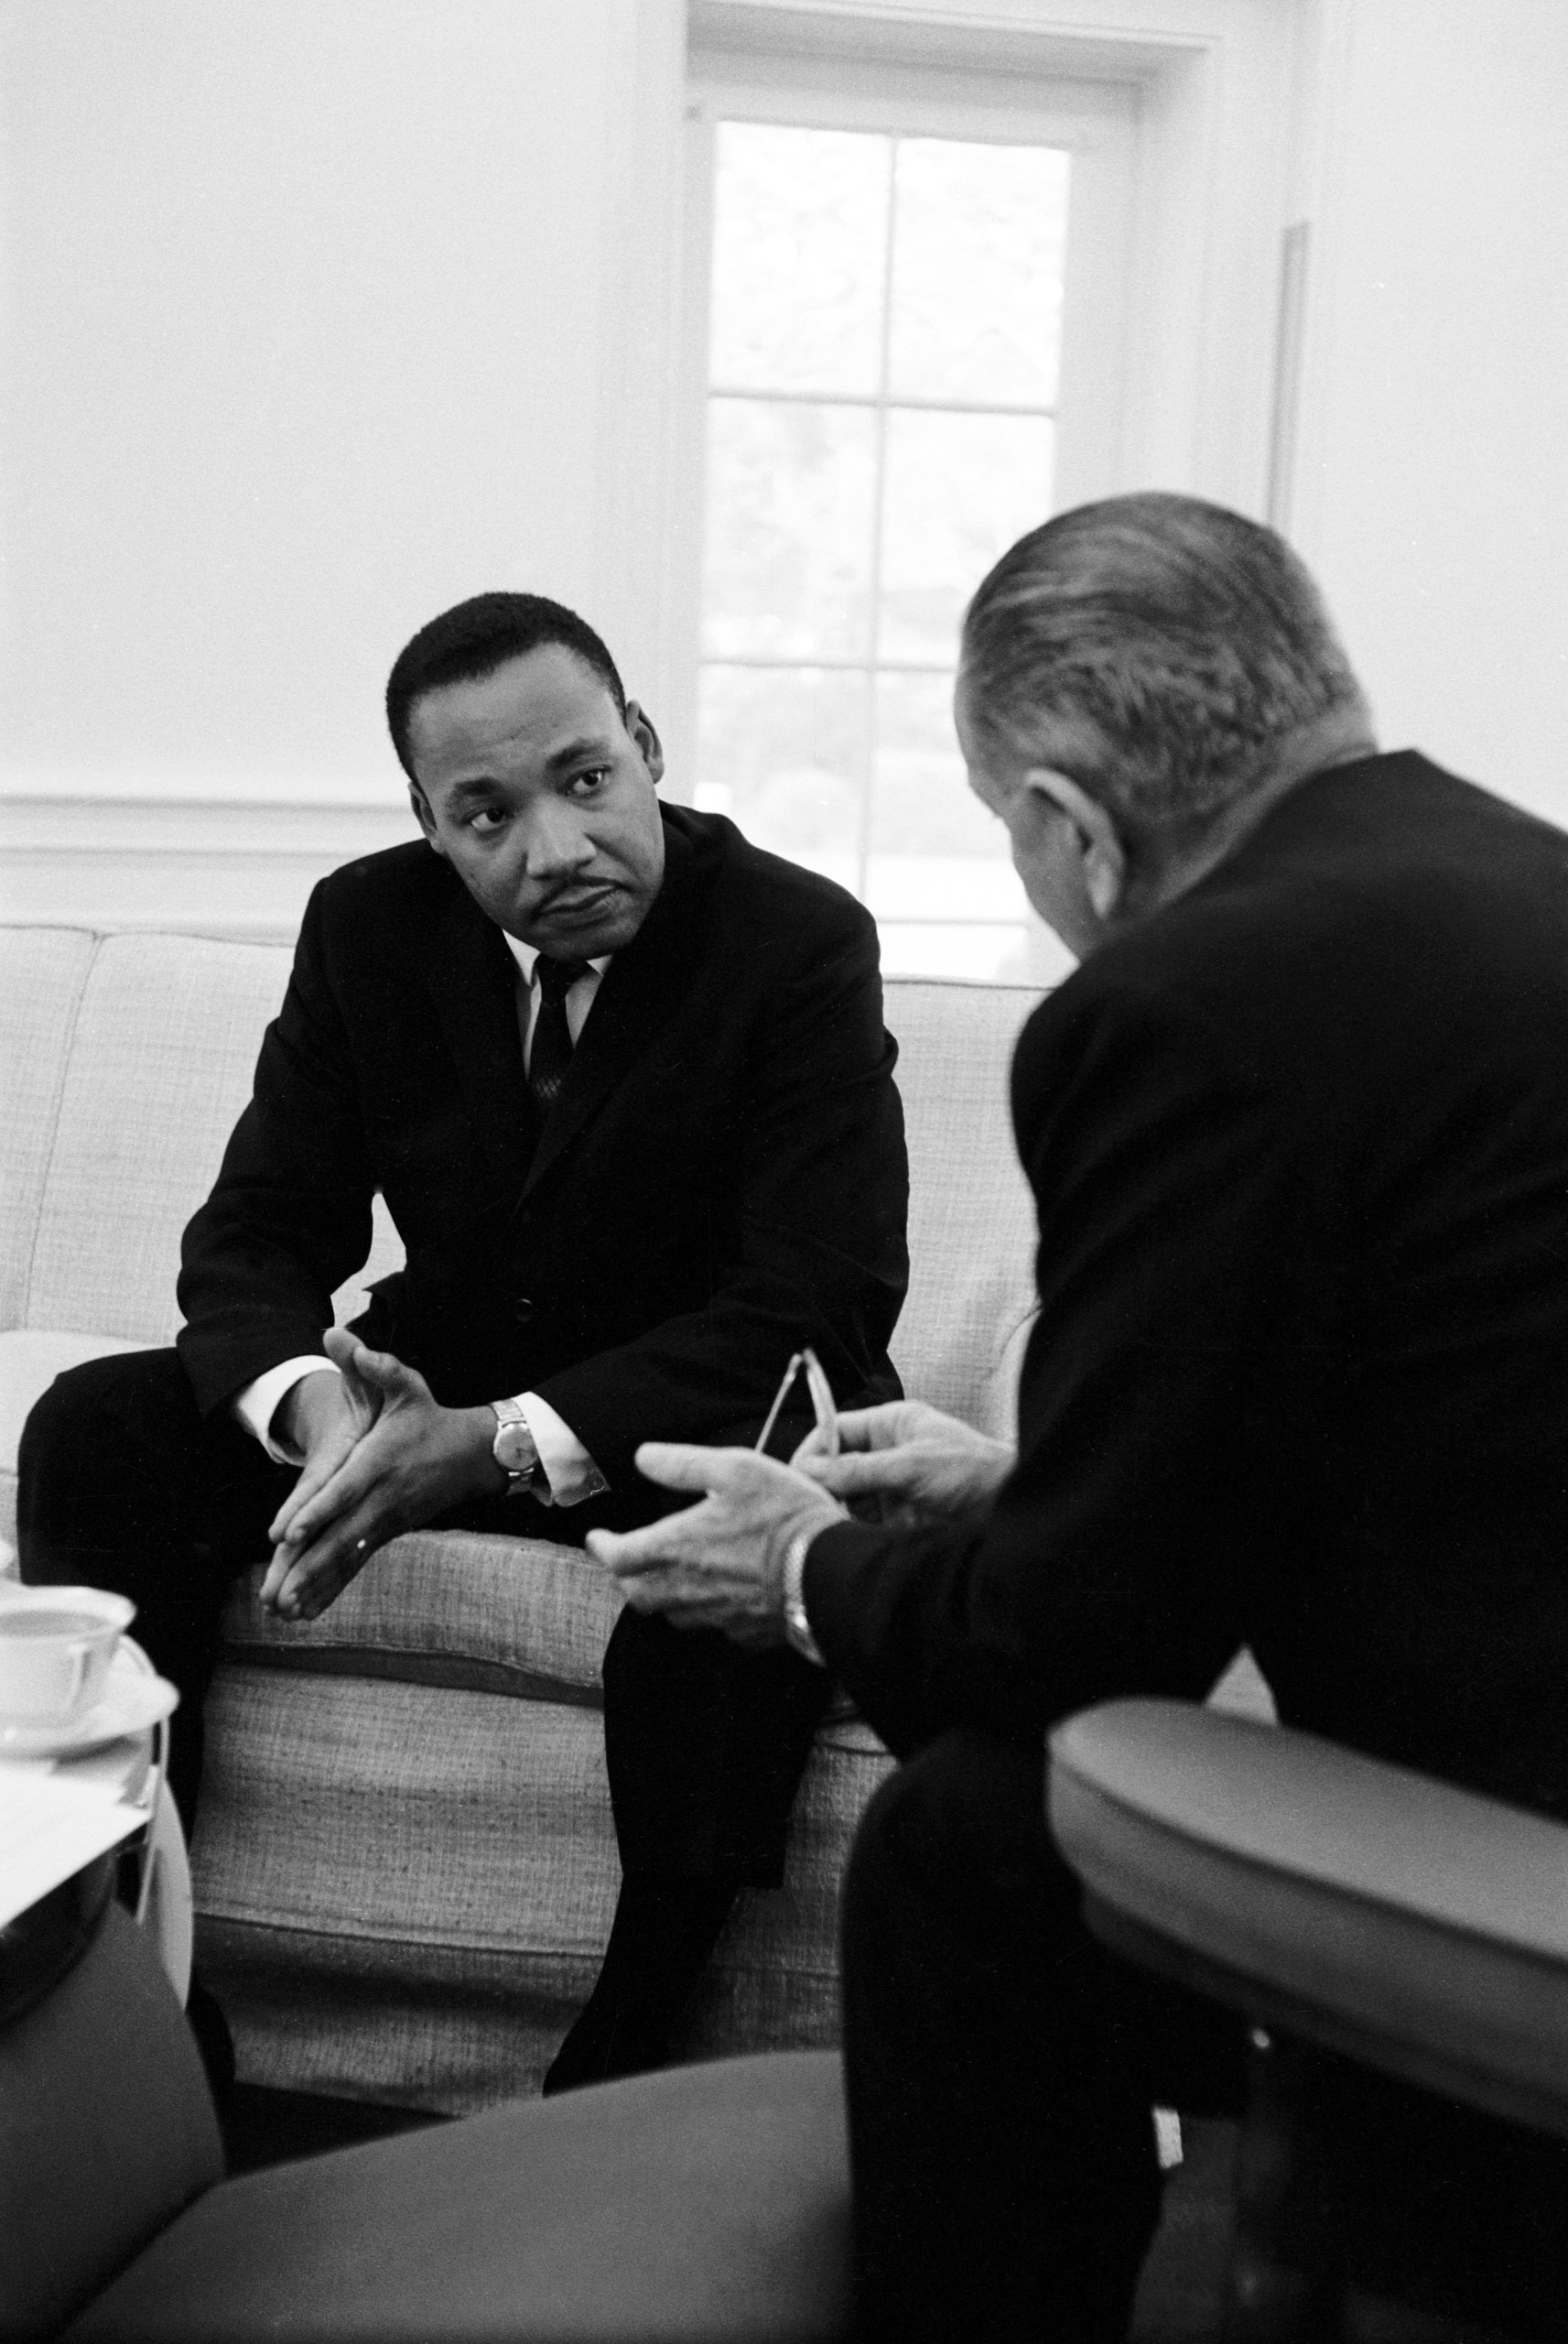 Civil rights leader Dr. Martin Luther King speaking with President Lyndon Johnson during a visit to the White House. (Stan Wayman—The LIFE Picture Collection/Getty Images)